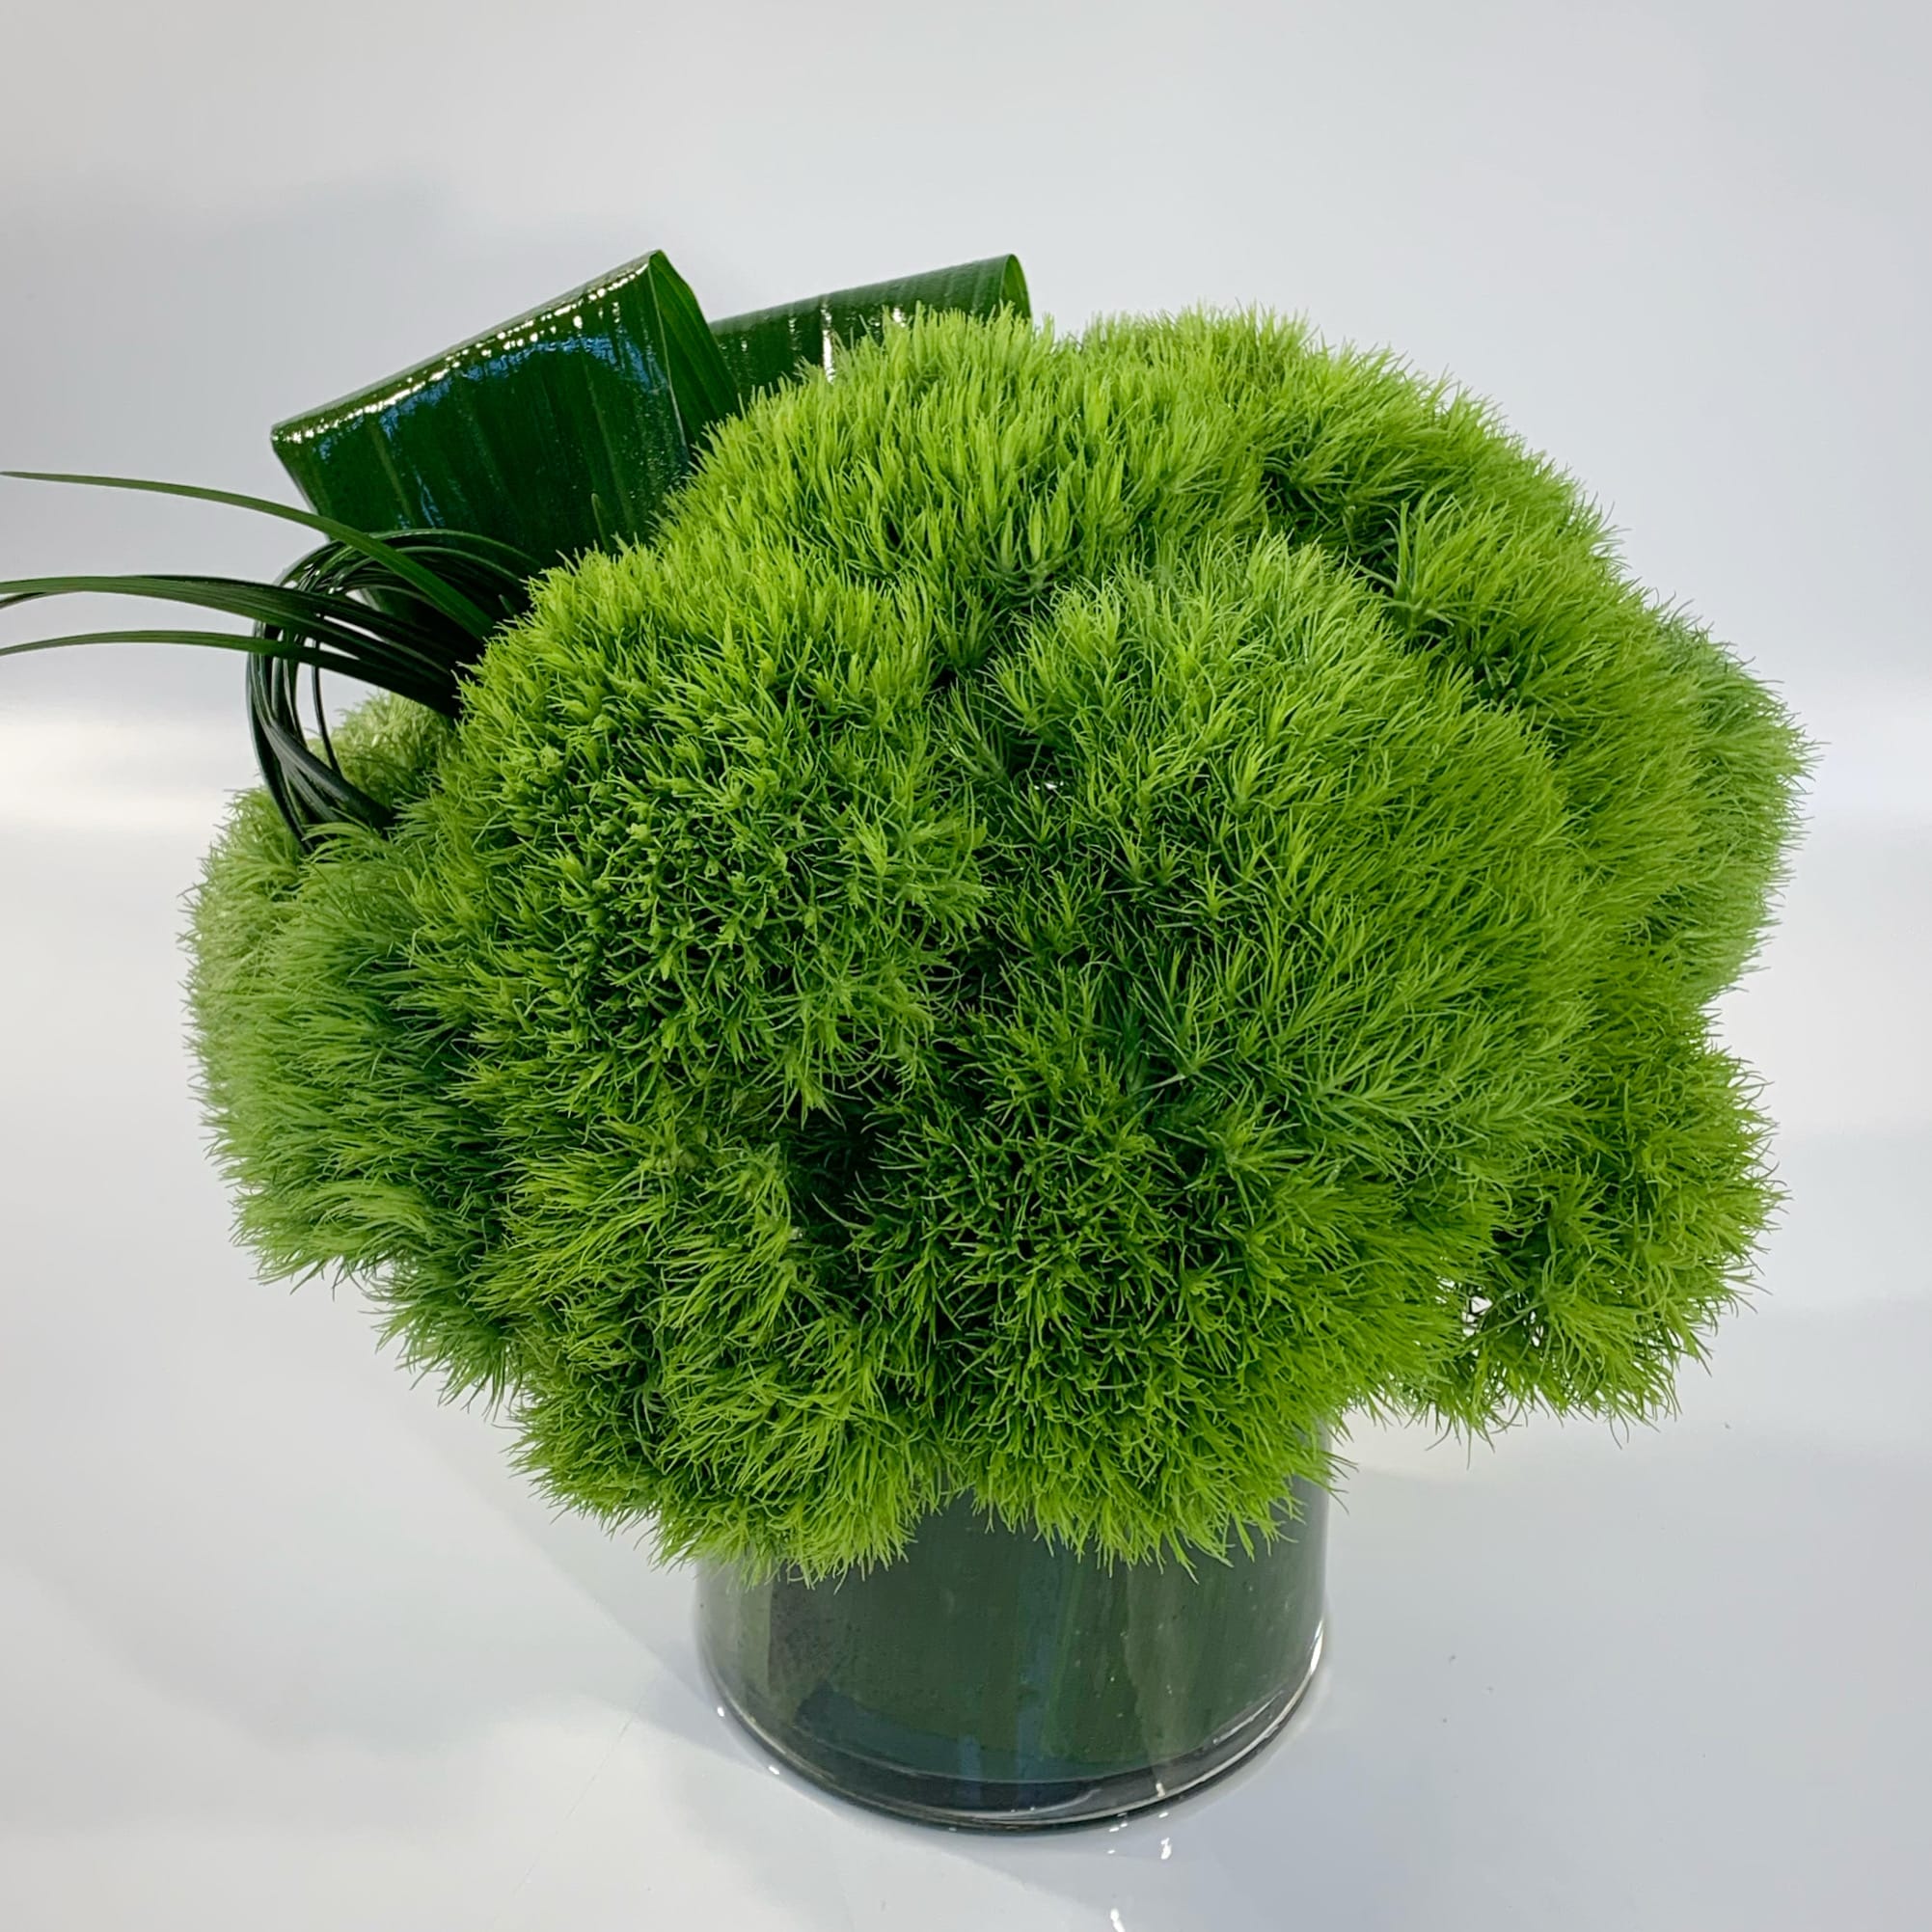 MOSSY - This long lasting modern arrangement is designed with green dianthus blooms, and sculpted greenery evokes the feeling of a mossy woodland. Arranged in a leaf-lined 5&quot; glass vessel. 